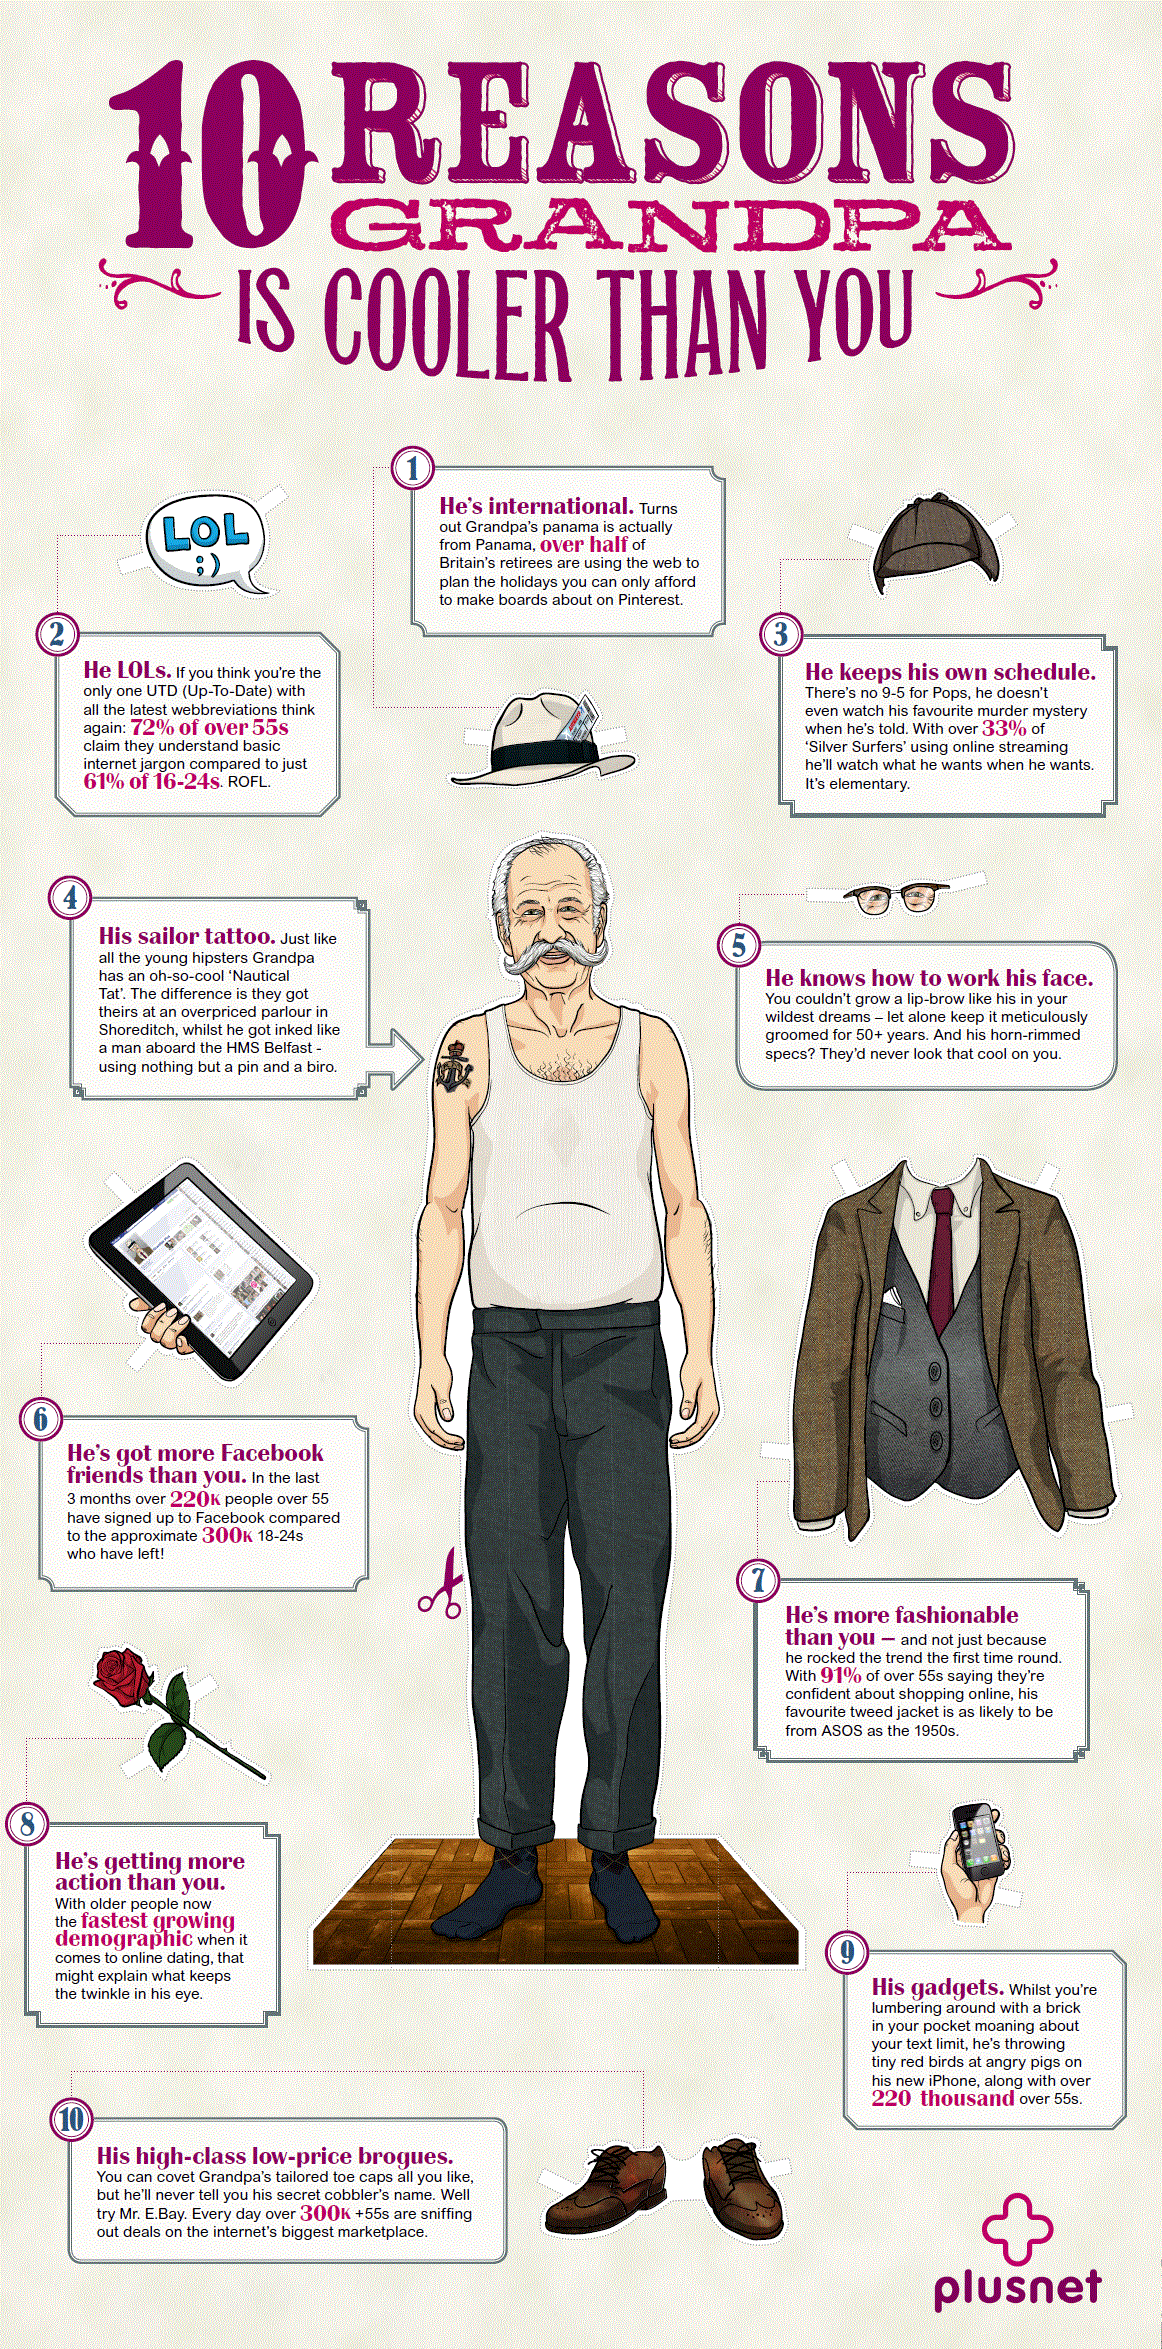 10 Reasons Why Grandpa is Cooler Than You